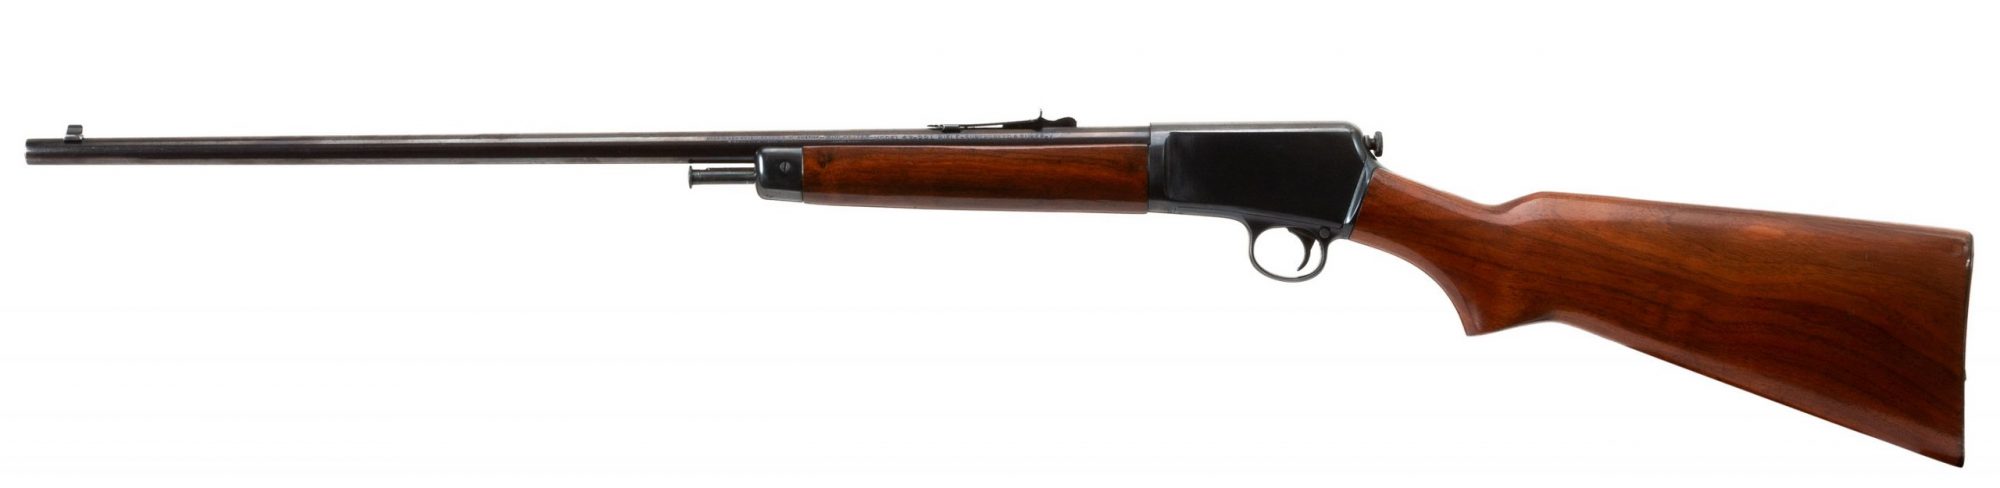 Photo of a pre-owned Winchester Model 63 from 1947, for sale by Turnbull Restoration of Bloomfield, NY